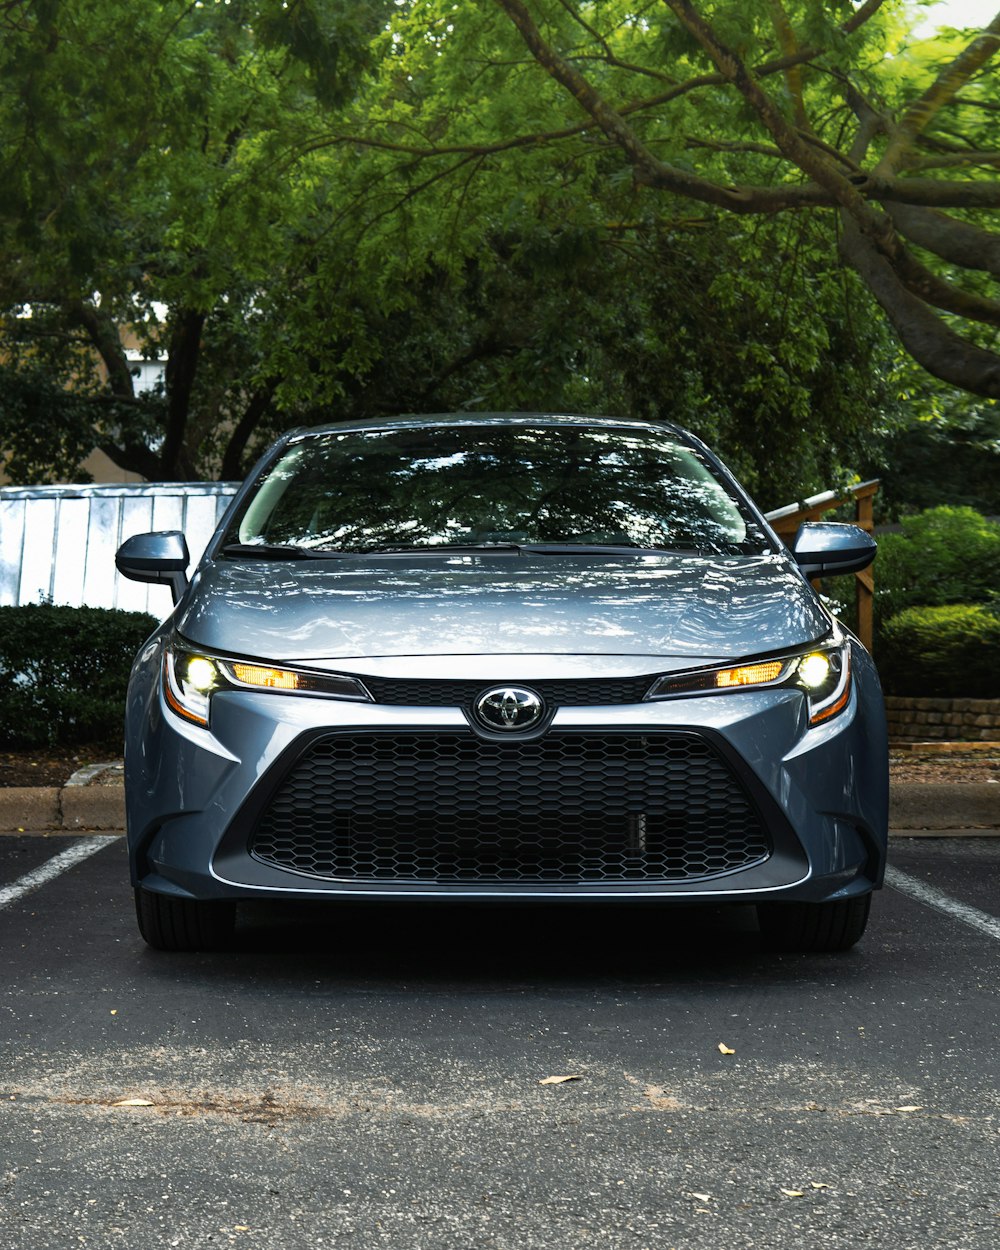 Toyota Corolla with a car wrap